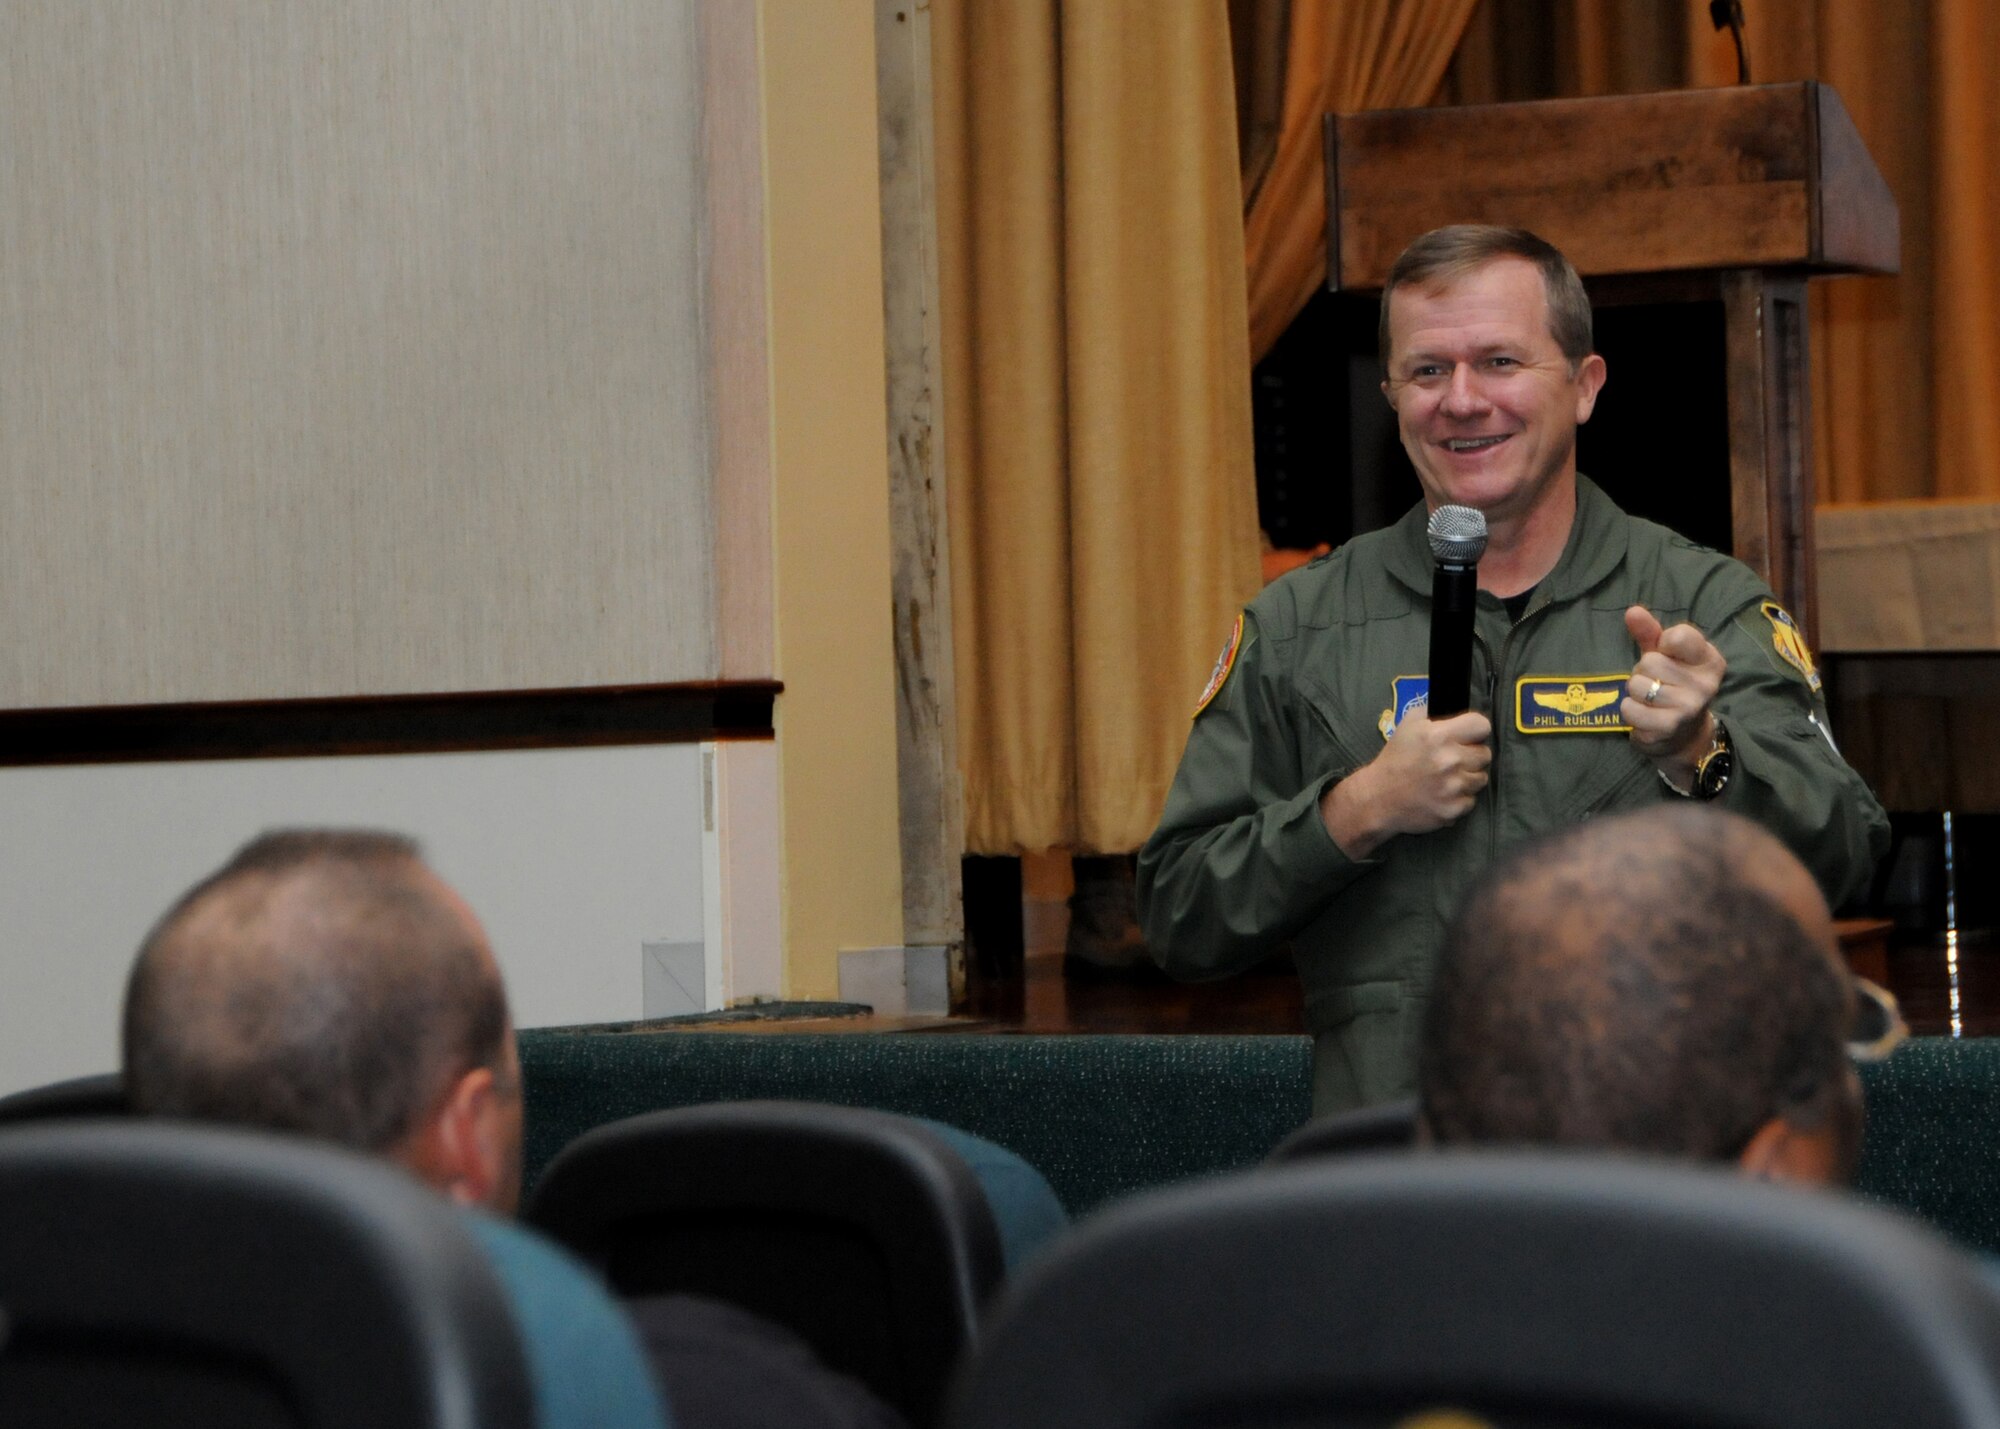 ANDERSEN AIR FORCE BASE, Guam - Brigadier Gen. Phil Ruhlman speaks to Air Force Civilians here Nov. 21 during a Town Hall Meeting about joint basing and the future for these soon to be Navy employees. (U.S. Air Force photo by Senior Airman Nichelle Griffiths)